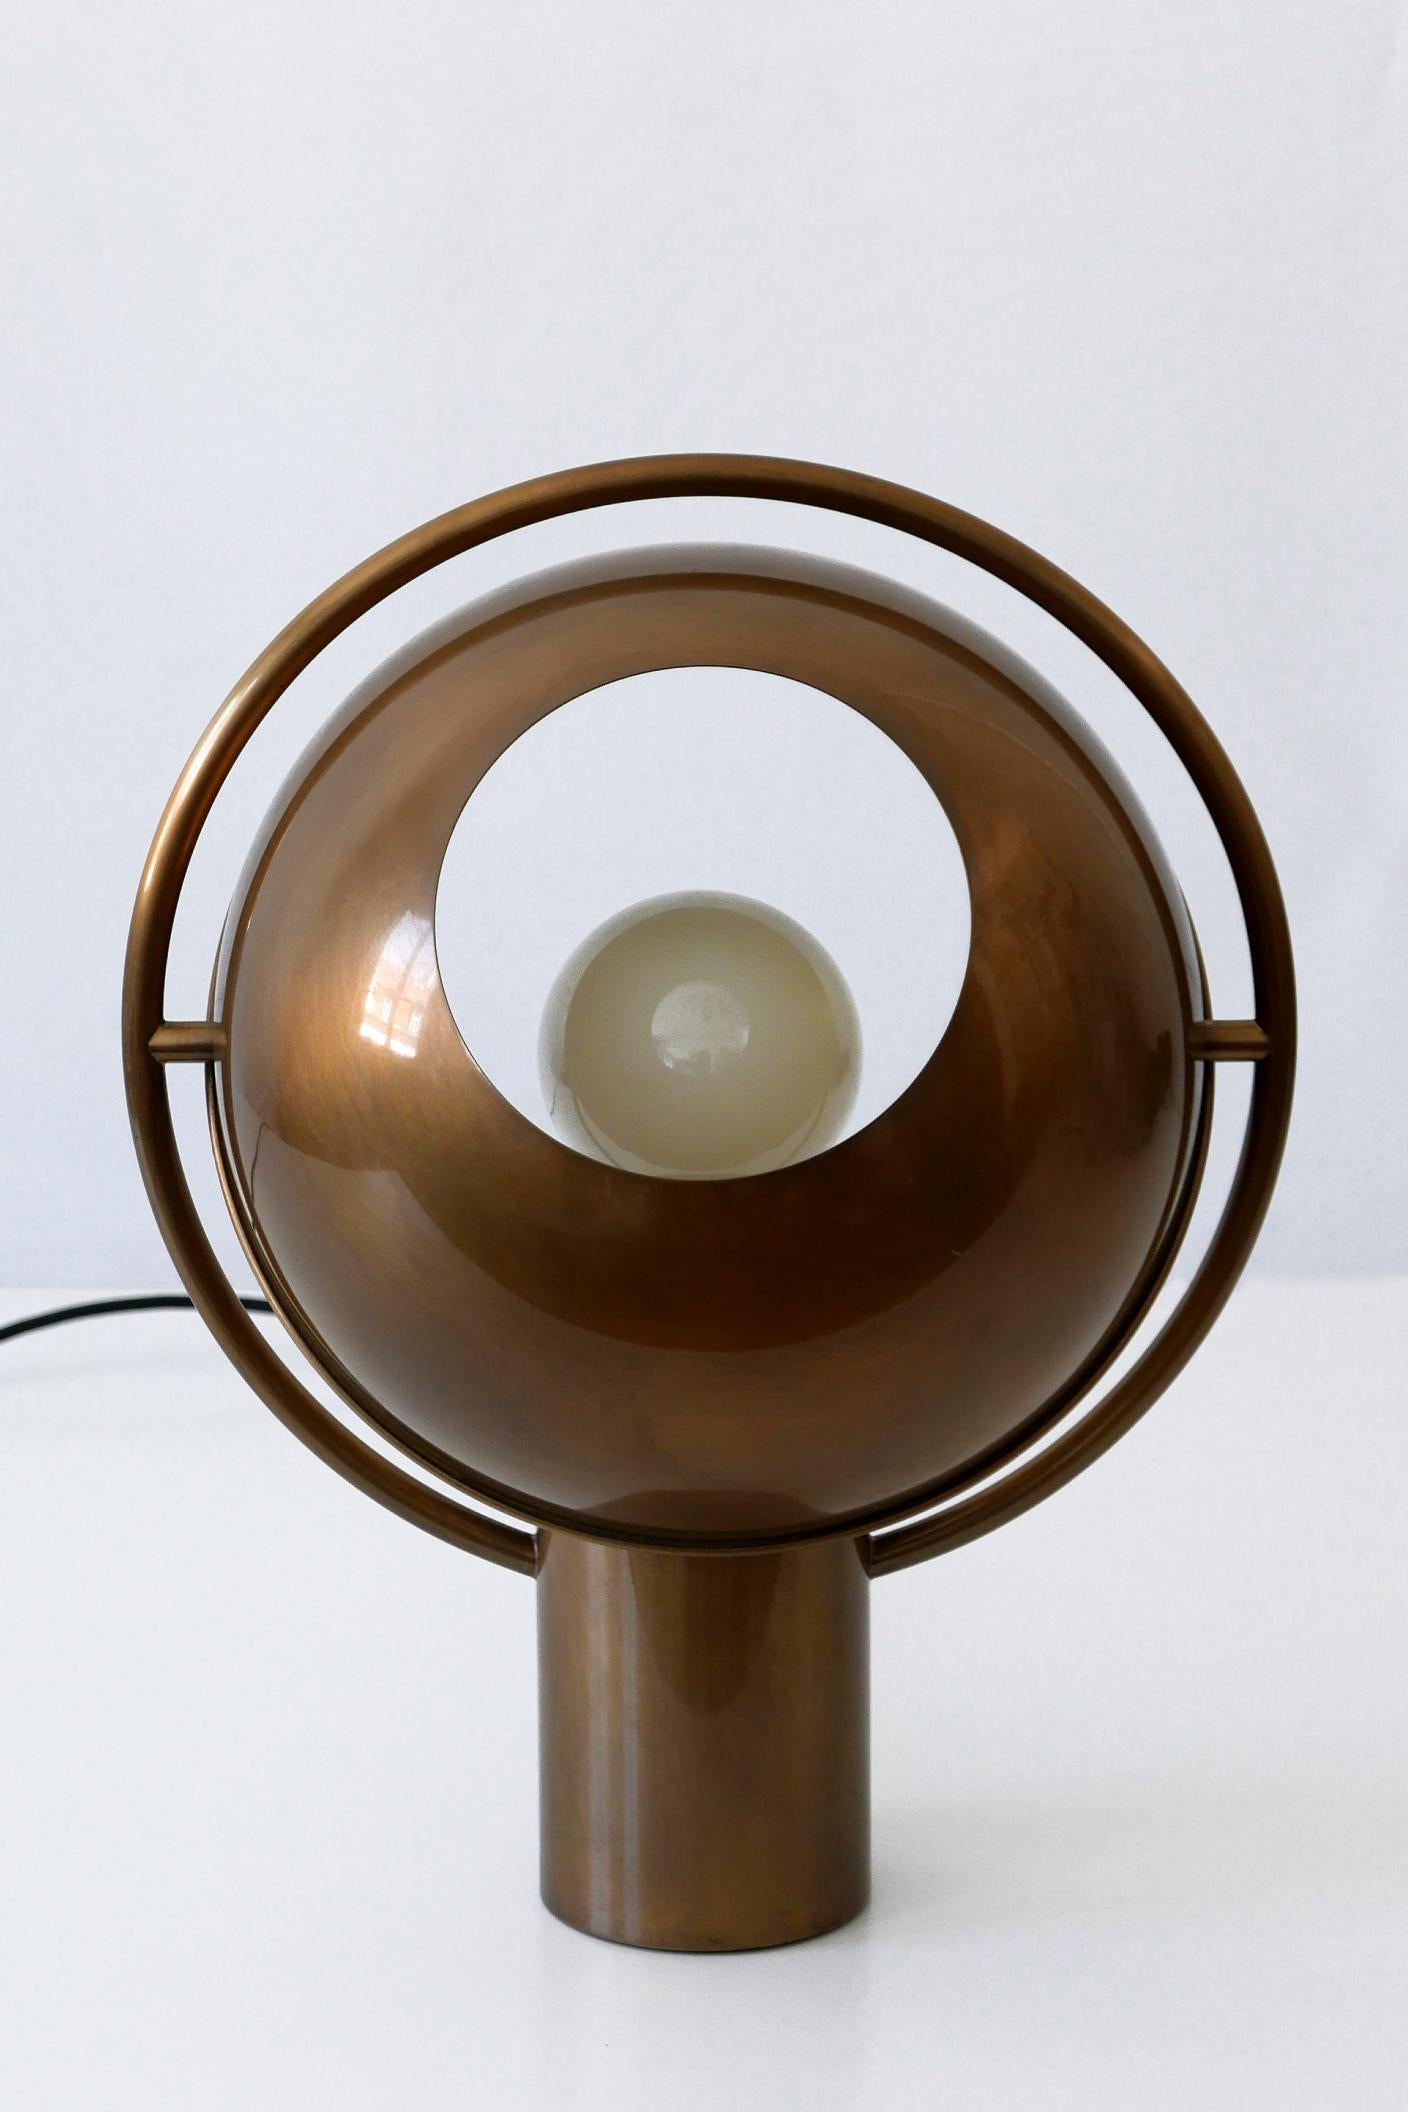 Brass Extremely Rare Mid-Century Modern Table Lamp by Florian Schulz Germany 1970s For Sale